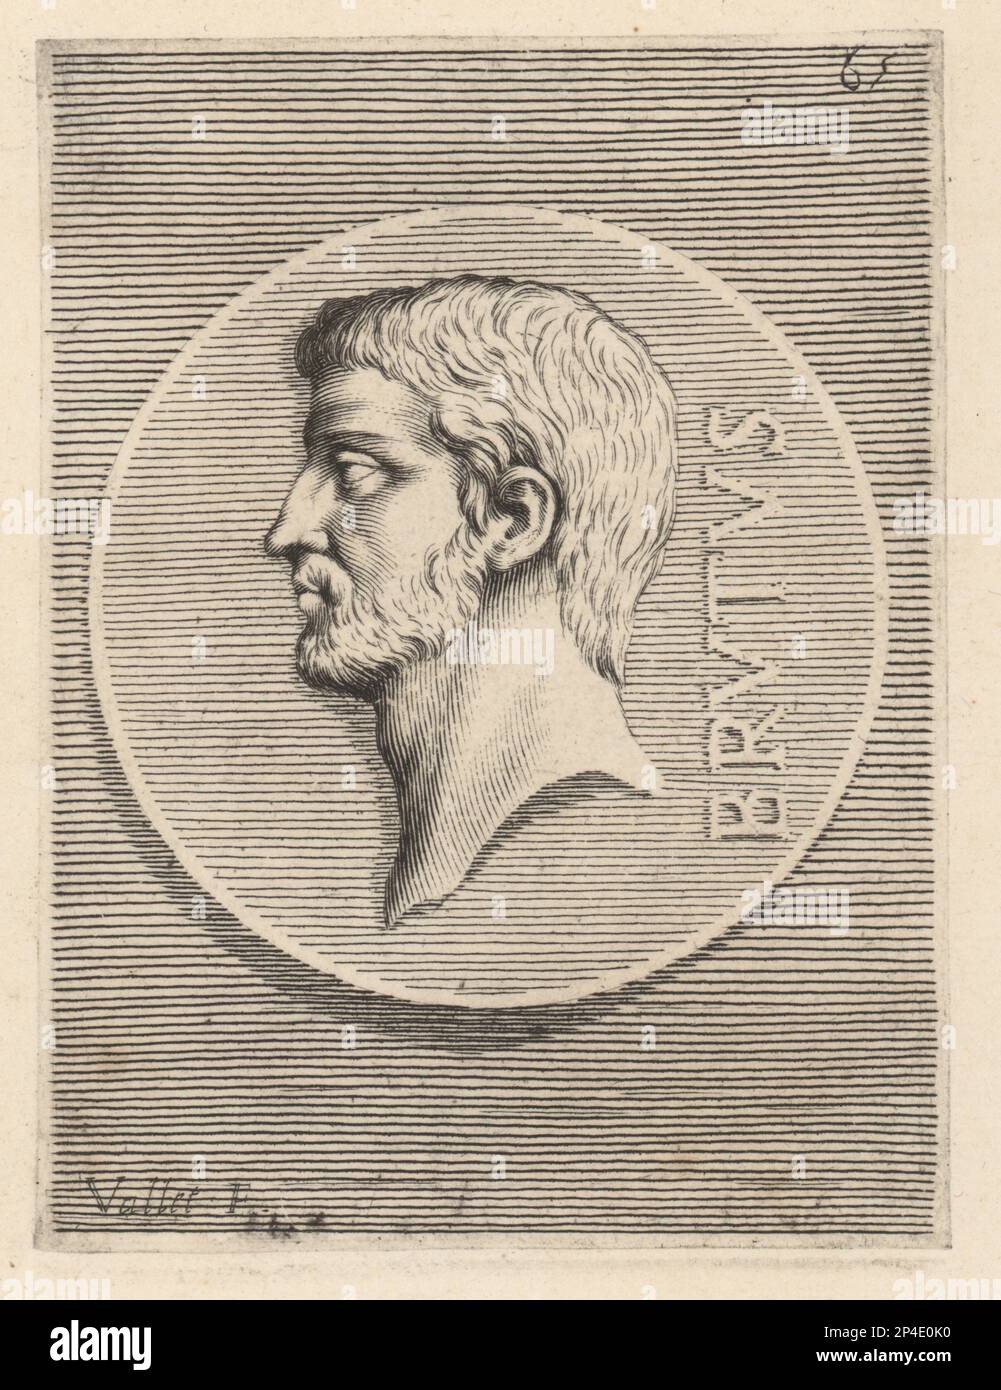 Lucius Junius Brutus, semi-legendary founder of the Roman Republic, and traditionally one of its first consuls in 509 BC. Bruto. Copperplate engraving by Guillaume Vallet after Giovanni Angelo Canini from Iconografia, cioe disegni d'imagini de famosissimi monarchi, regi, filososi, poeti ed oratori dell' Antichita, Drawings of images of famous monarchs, kings, philosophers, poets and orators of Antiquity, Ignatio de’Lazari, Rome, 1699. Stock Photo